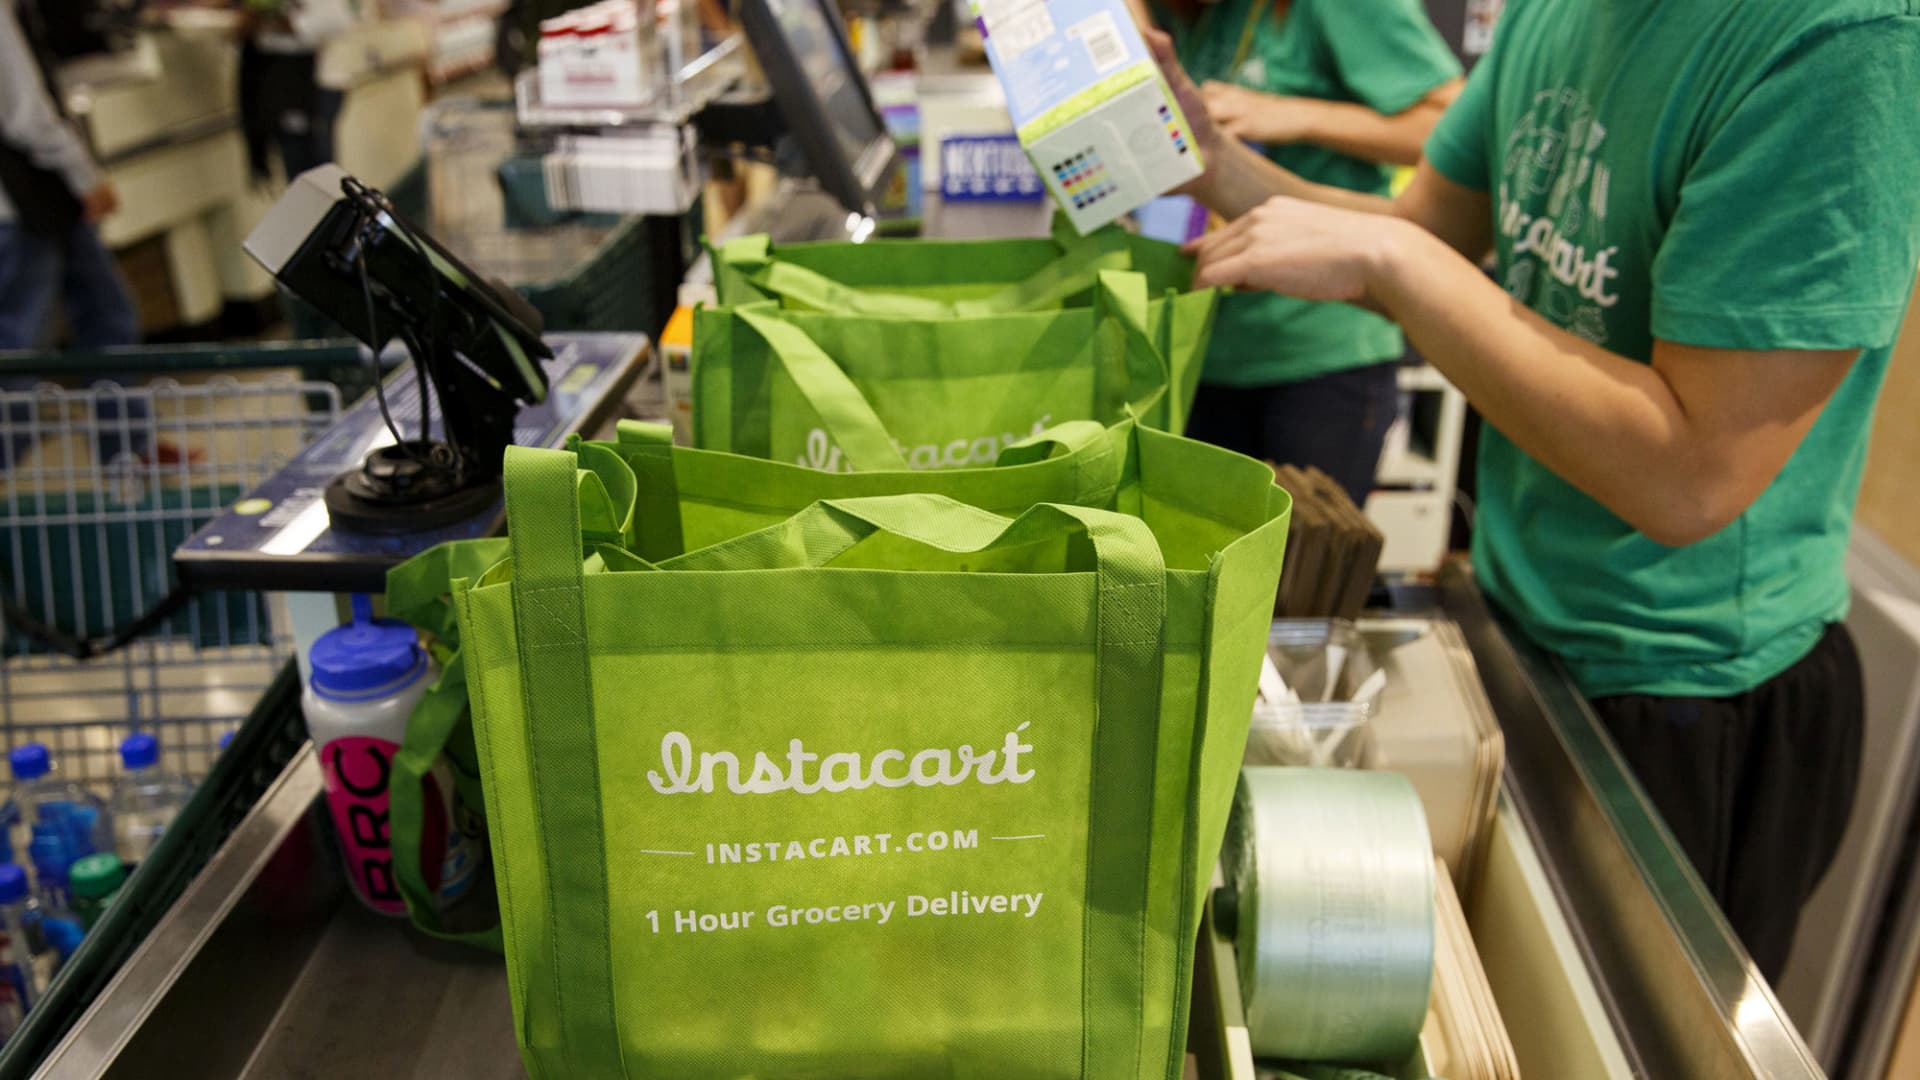 Instacart aiming for valuation of $8.6 billion to $9.3 billion in IPO, reports say